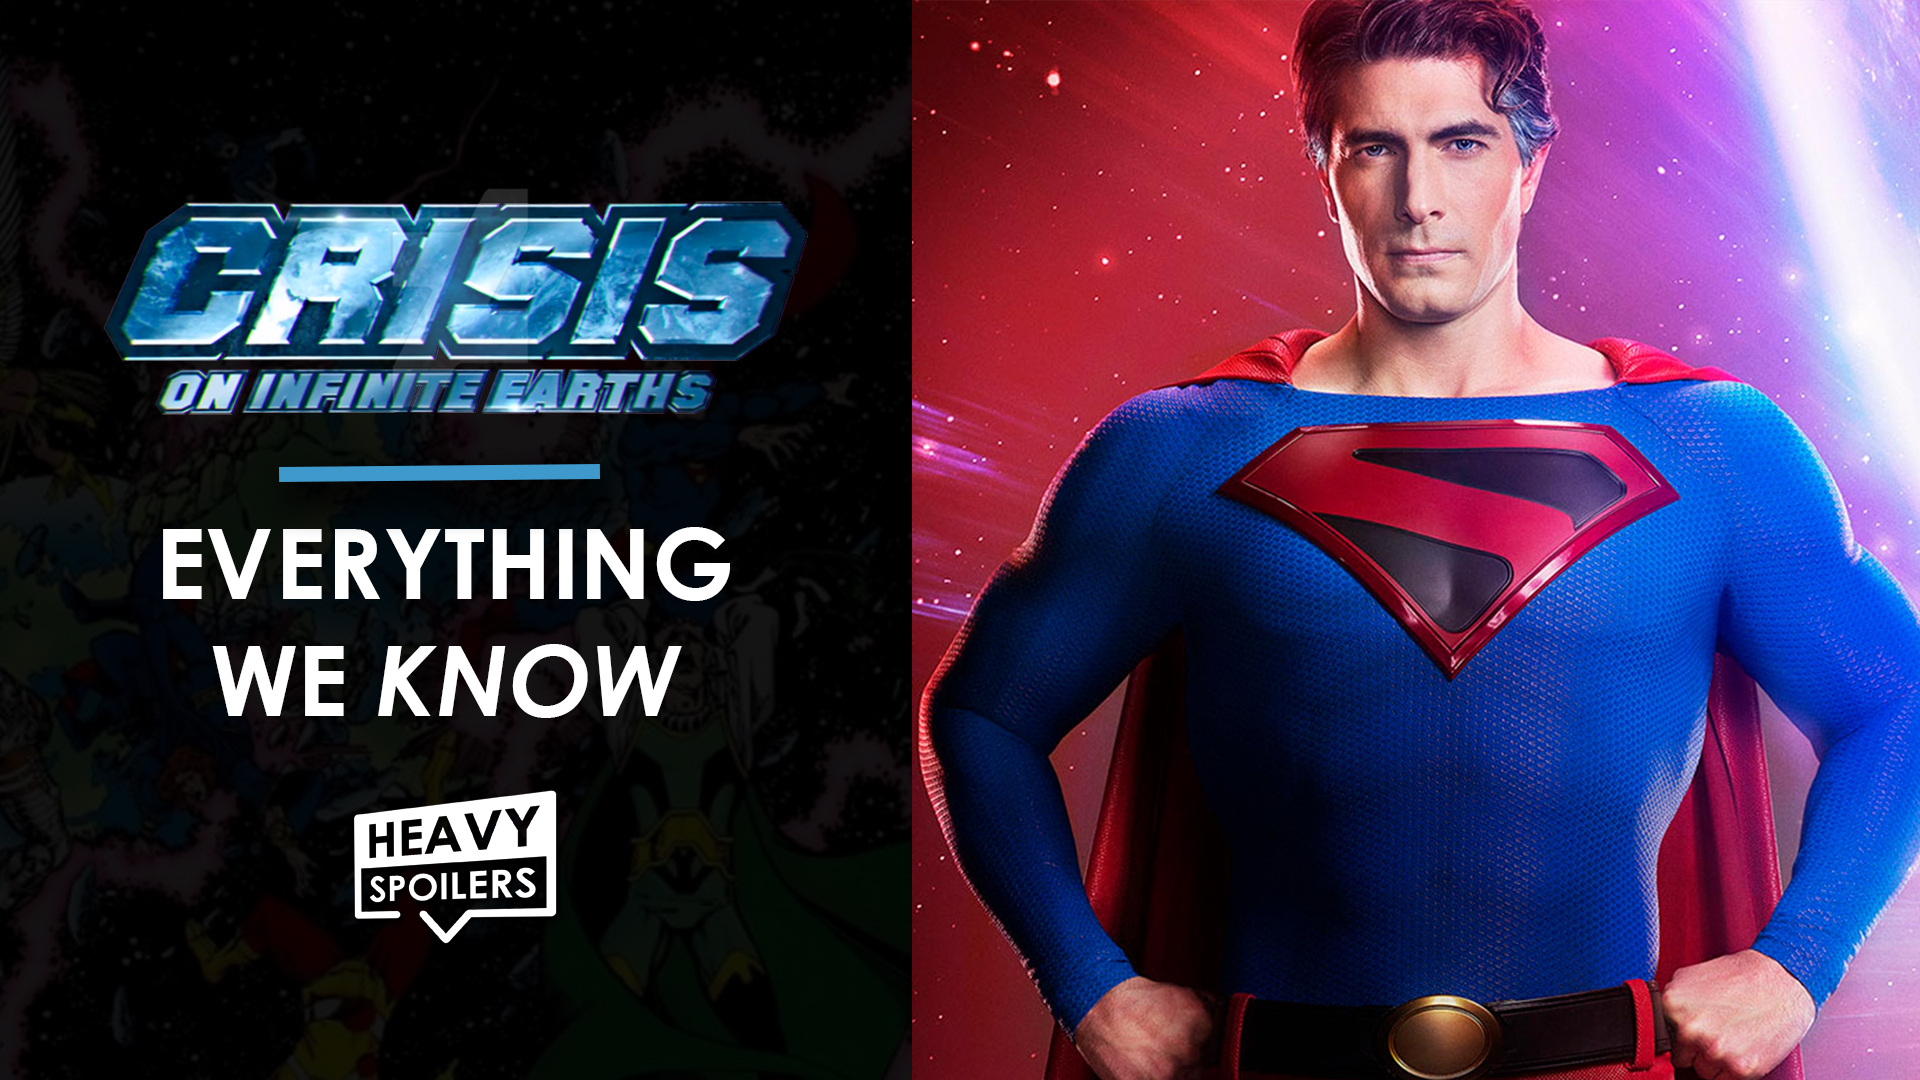 arrowverse crisis on infinite earths crossover explained everything we know so far brandon routh tom welling kevin conroy plot line story and trailer 4k